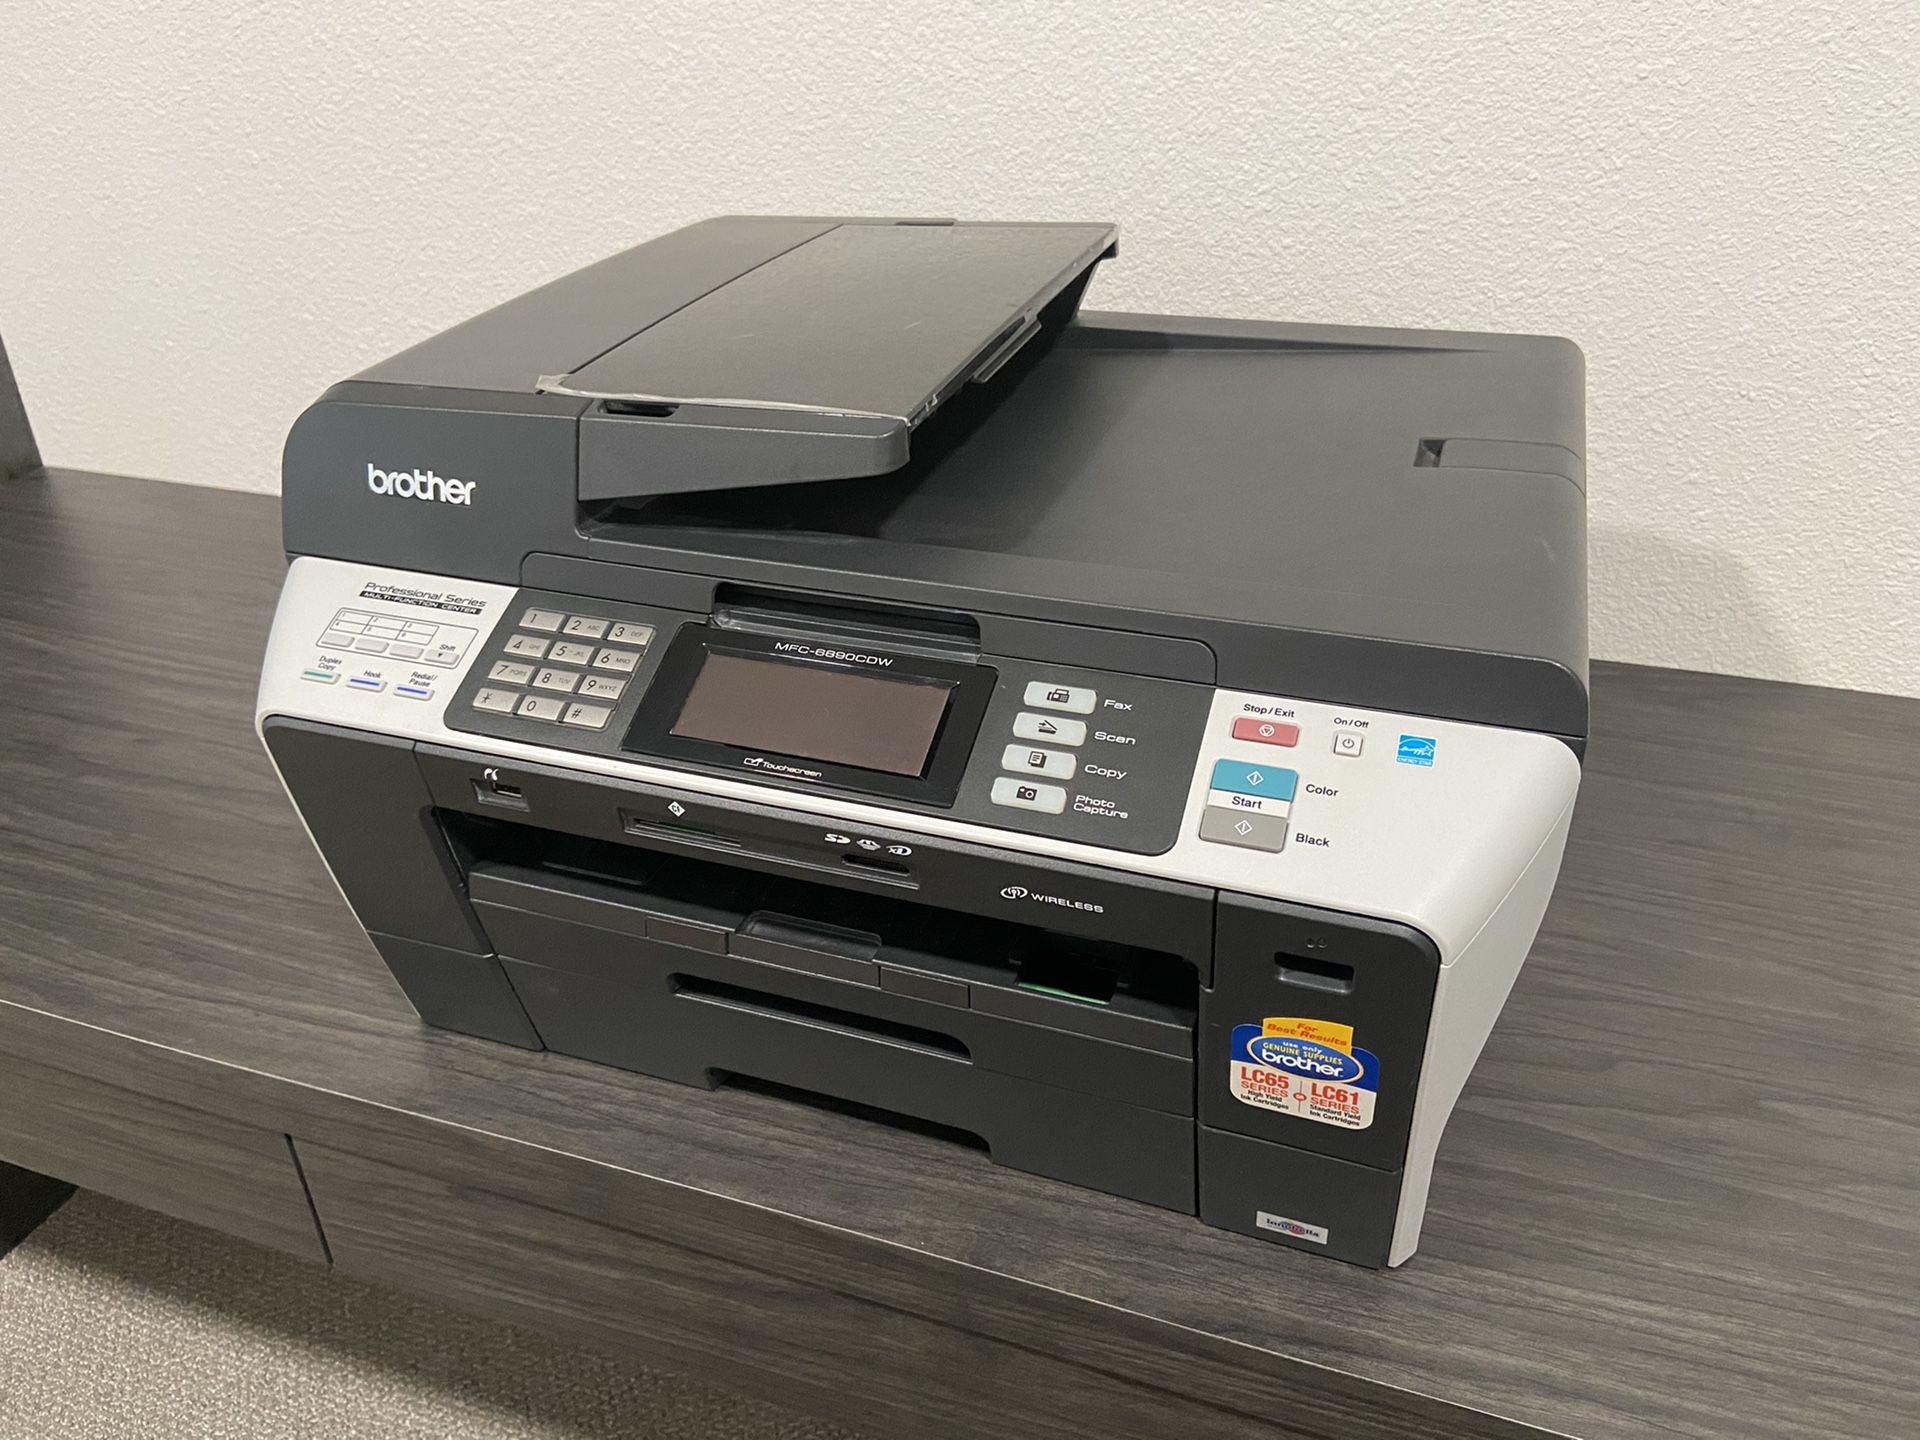 Brother MFC-6890CDW All in one Printer